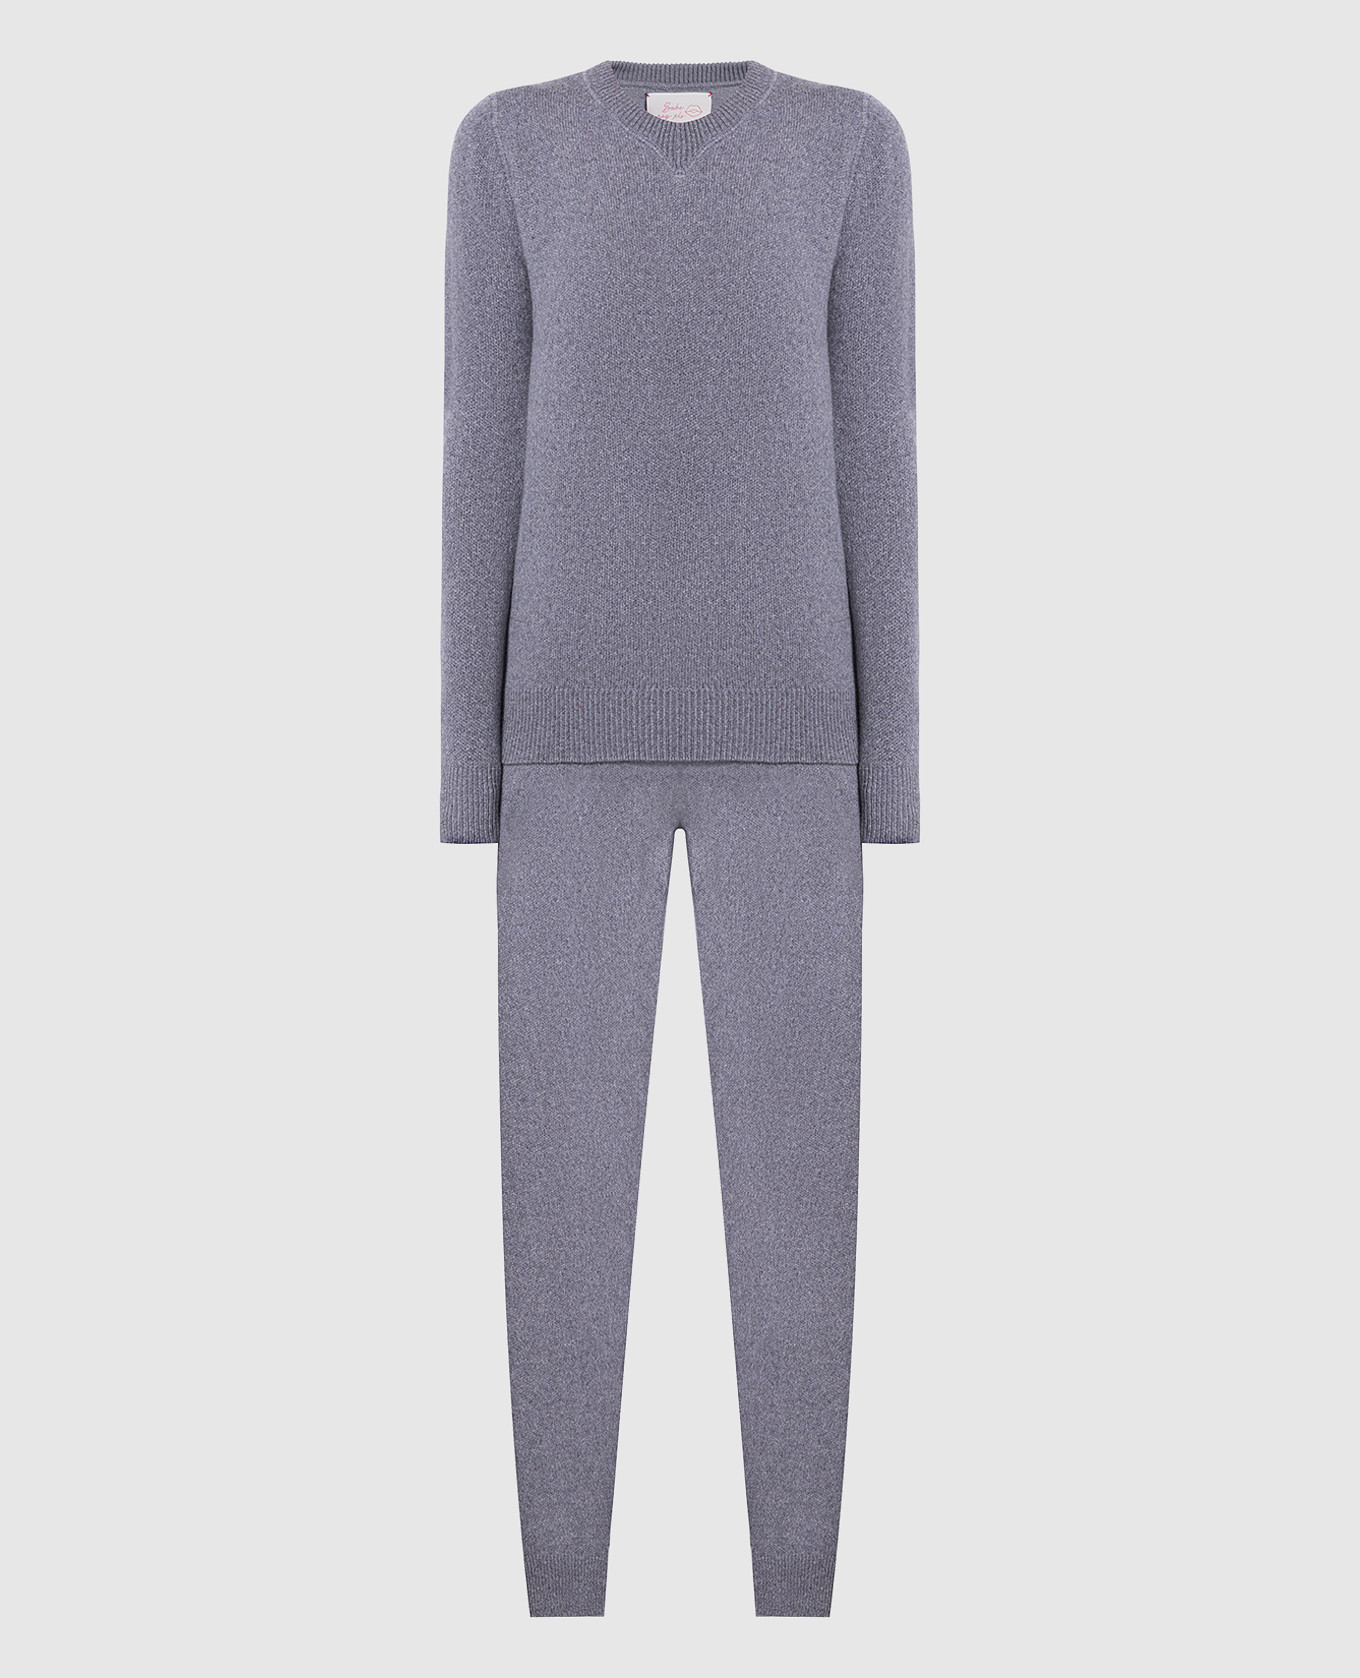 Gray cashmere jumper and joggers suit